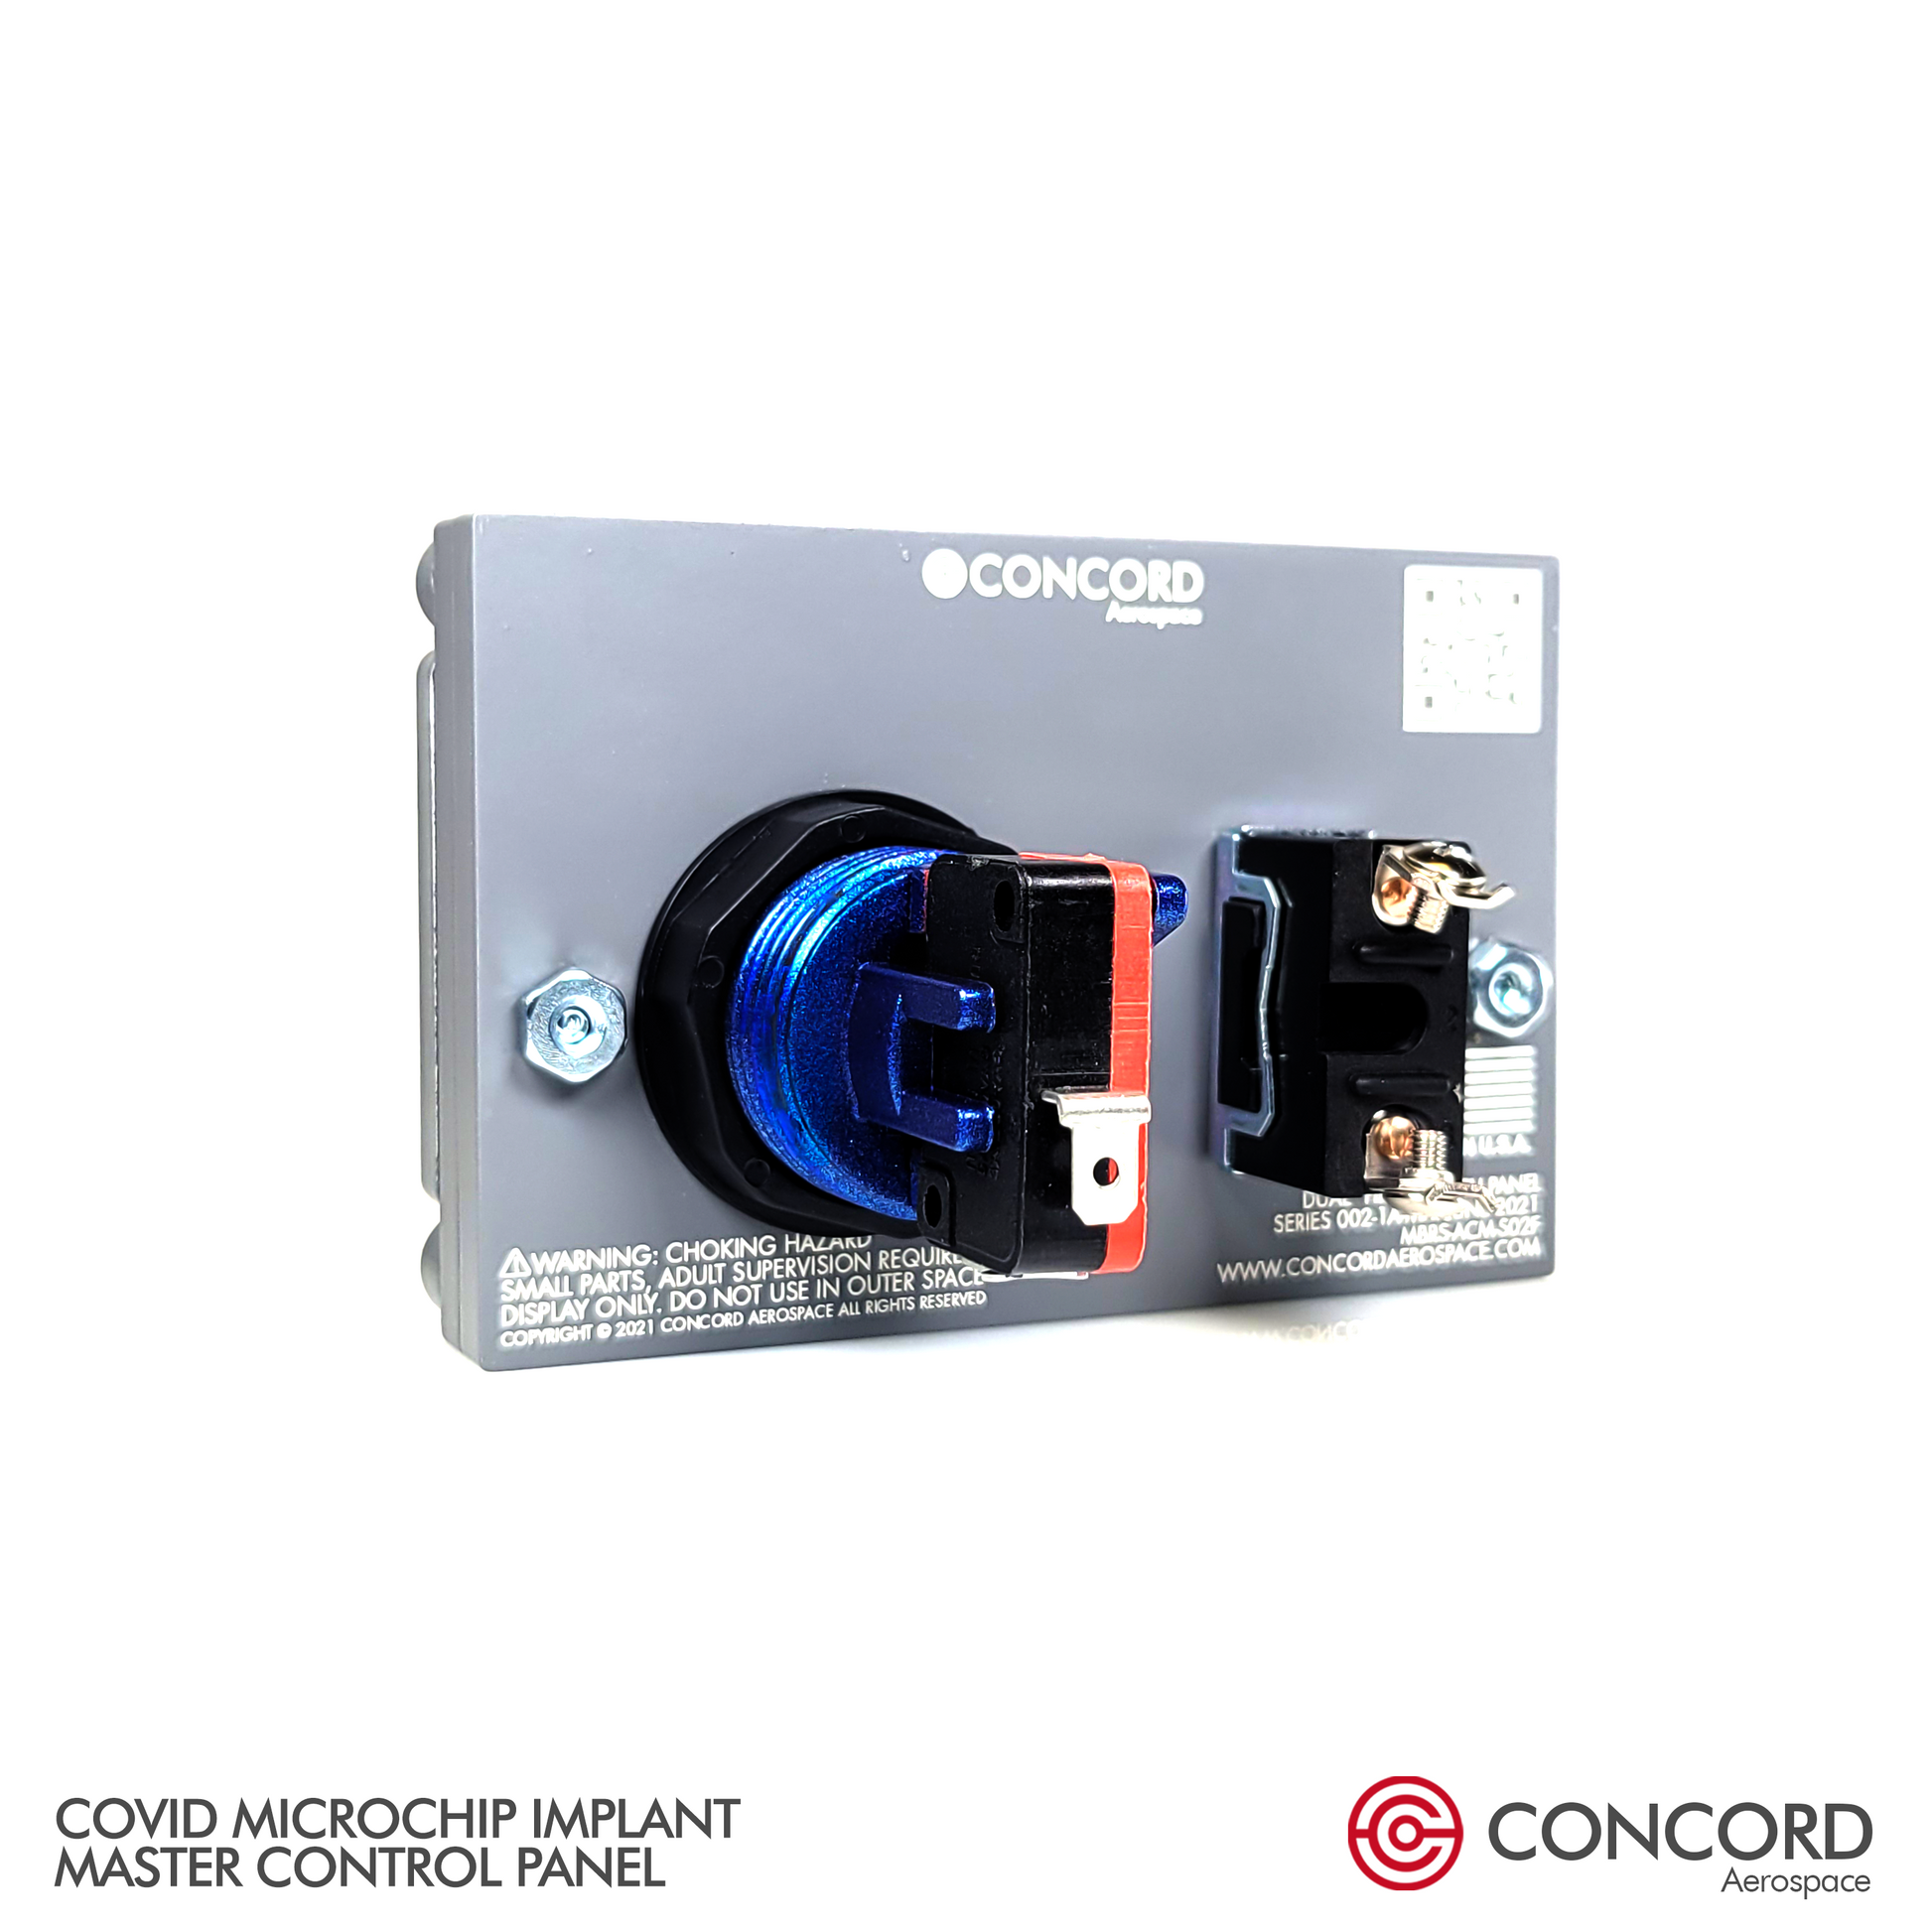 COVID MICROCHIP IMPLANT MASTER CONTROL PANEL - Concord Aerospace Concord Aerospace Concord Aerospace SPACE SWITCH - SPECIALS